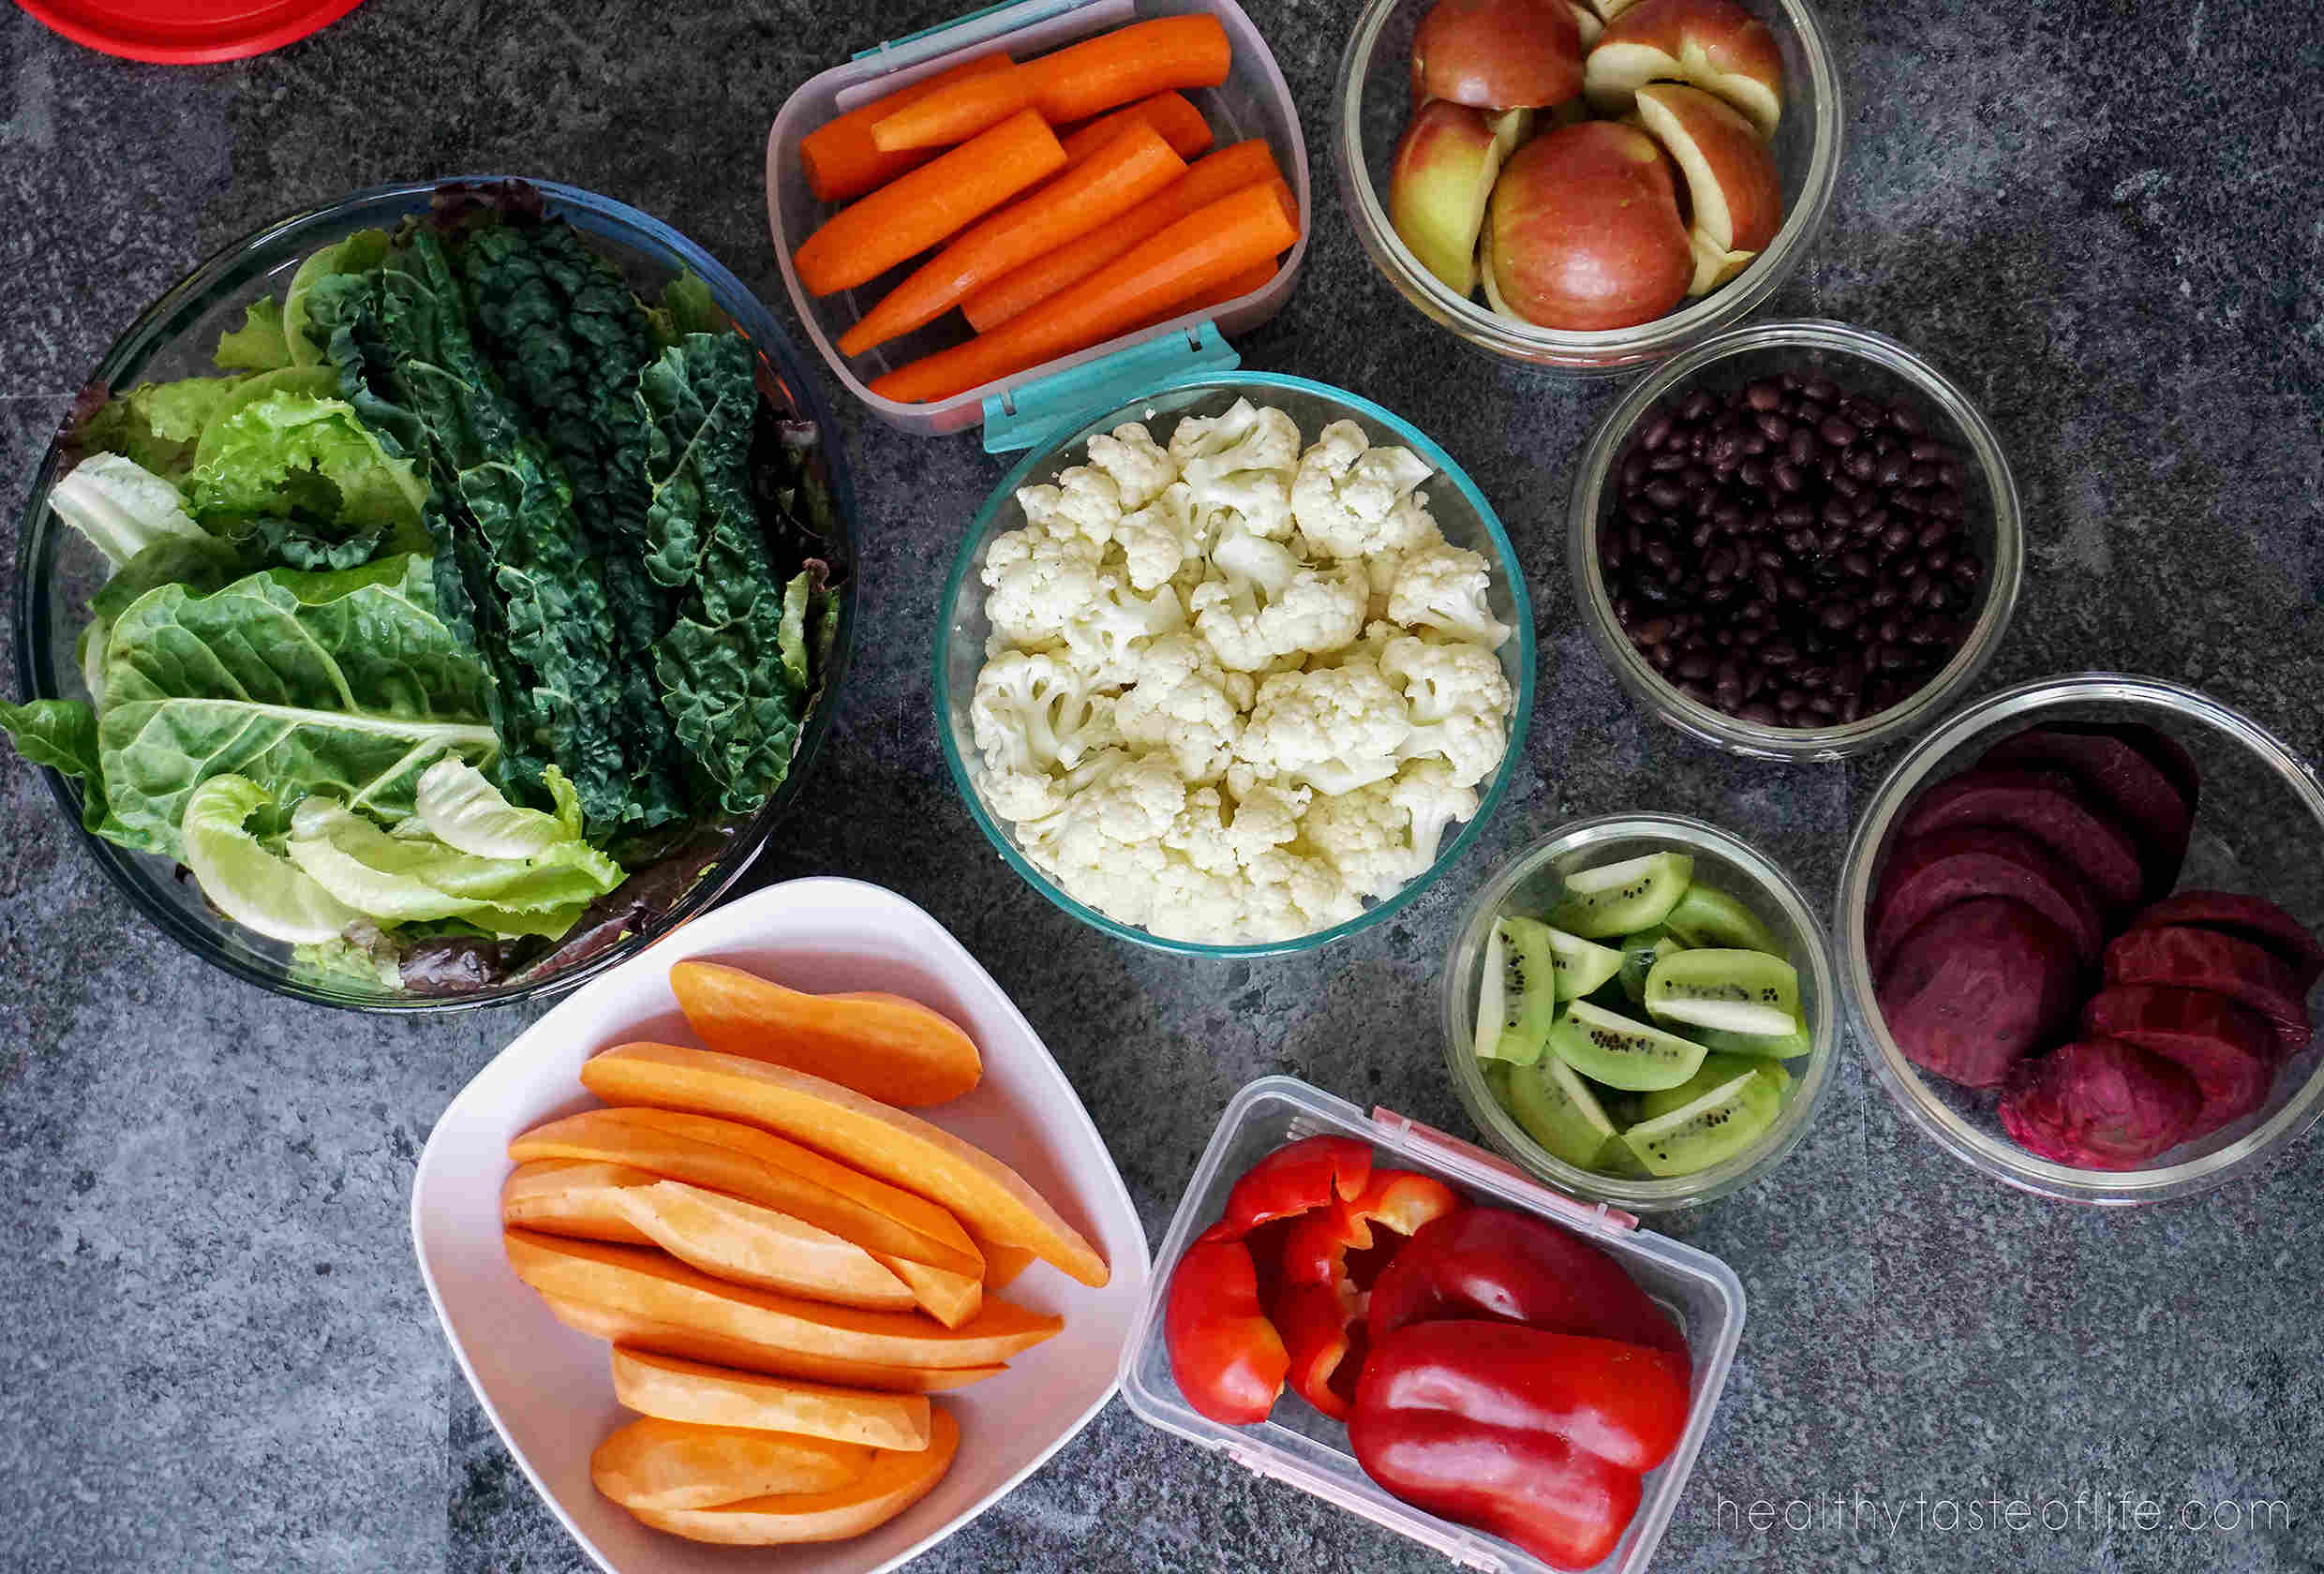 How To Store Prepped Veggies